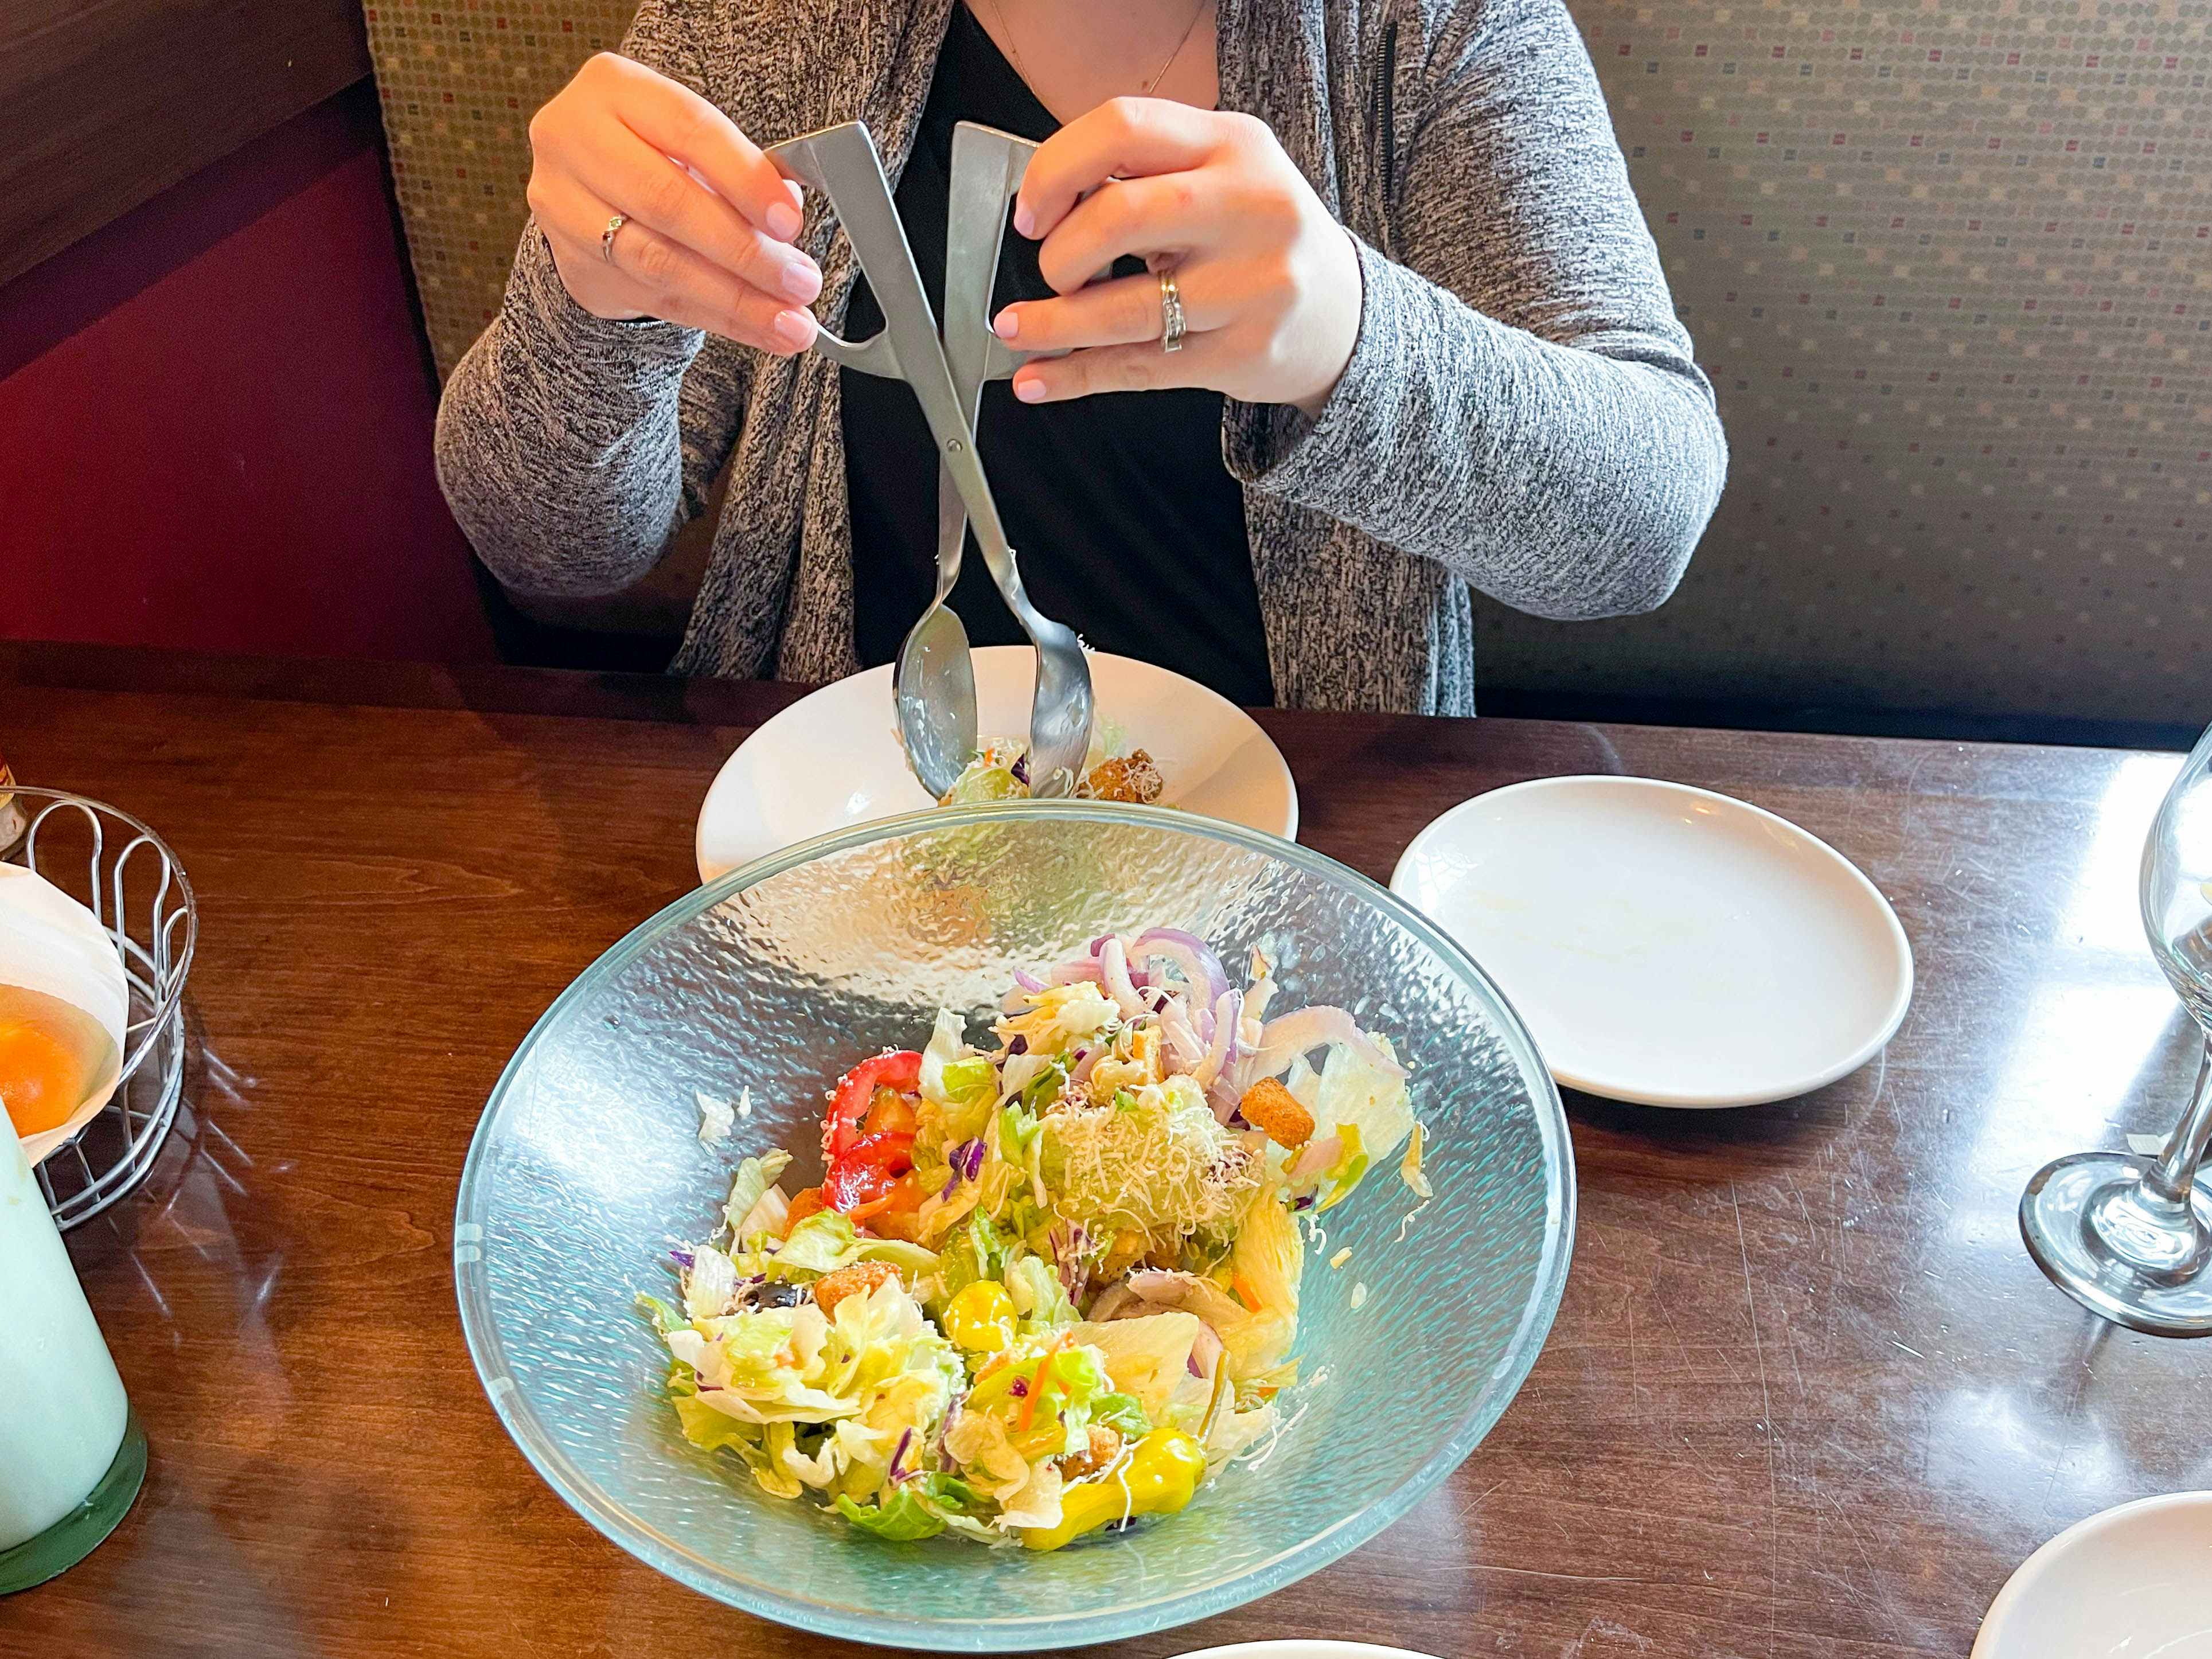 A person using the salad tongs to grab some salad out of the large Olive Garden salad serving bowl.